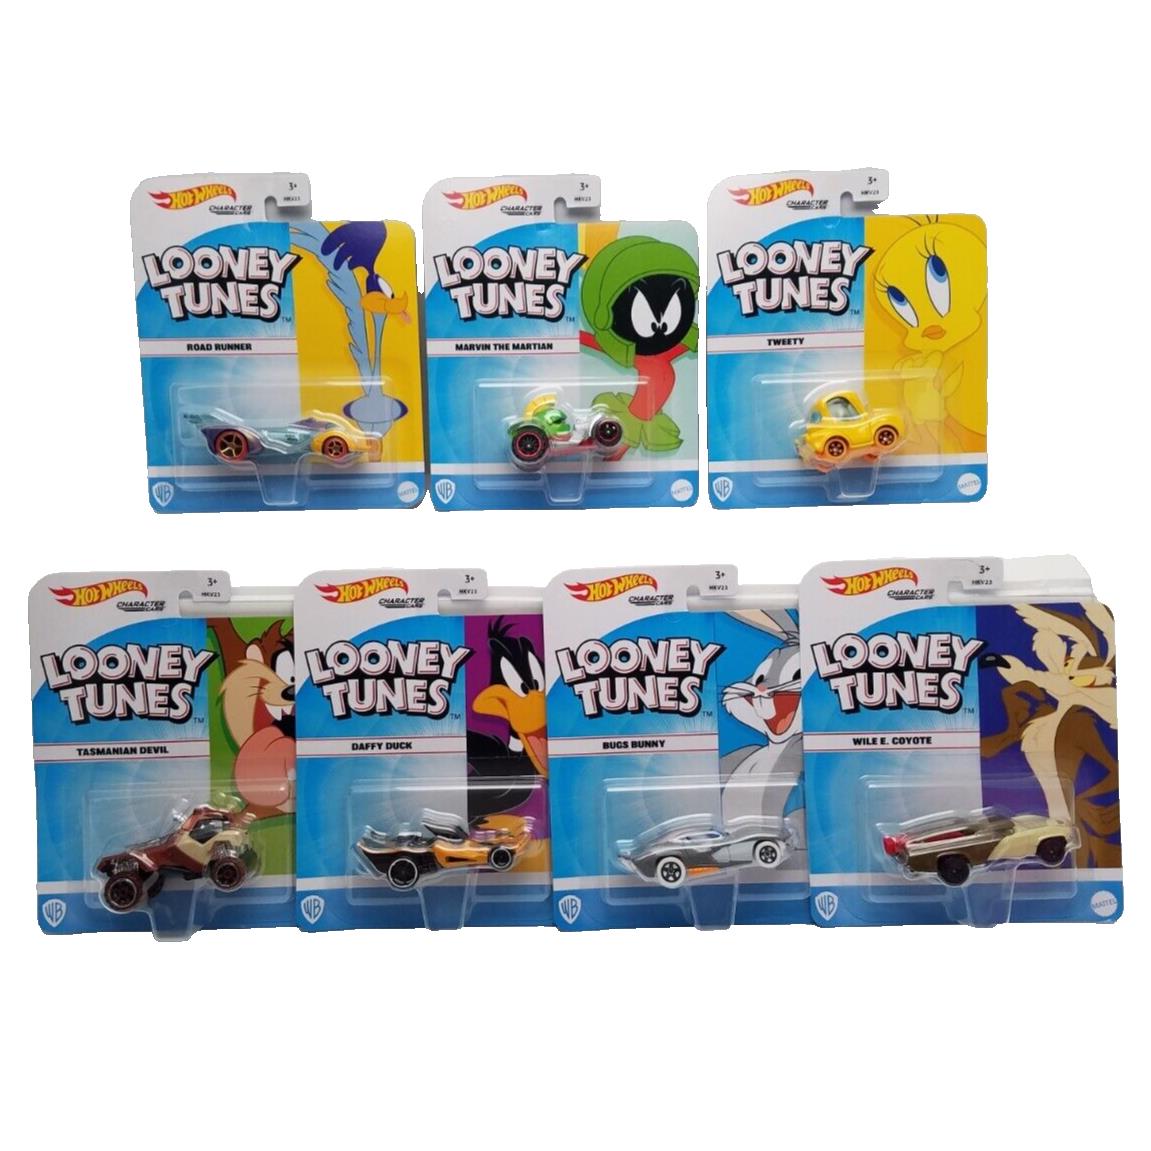 Hot Wheels Looney Tunes Character Cars Complete Set of 7